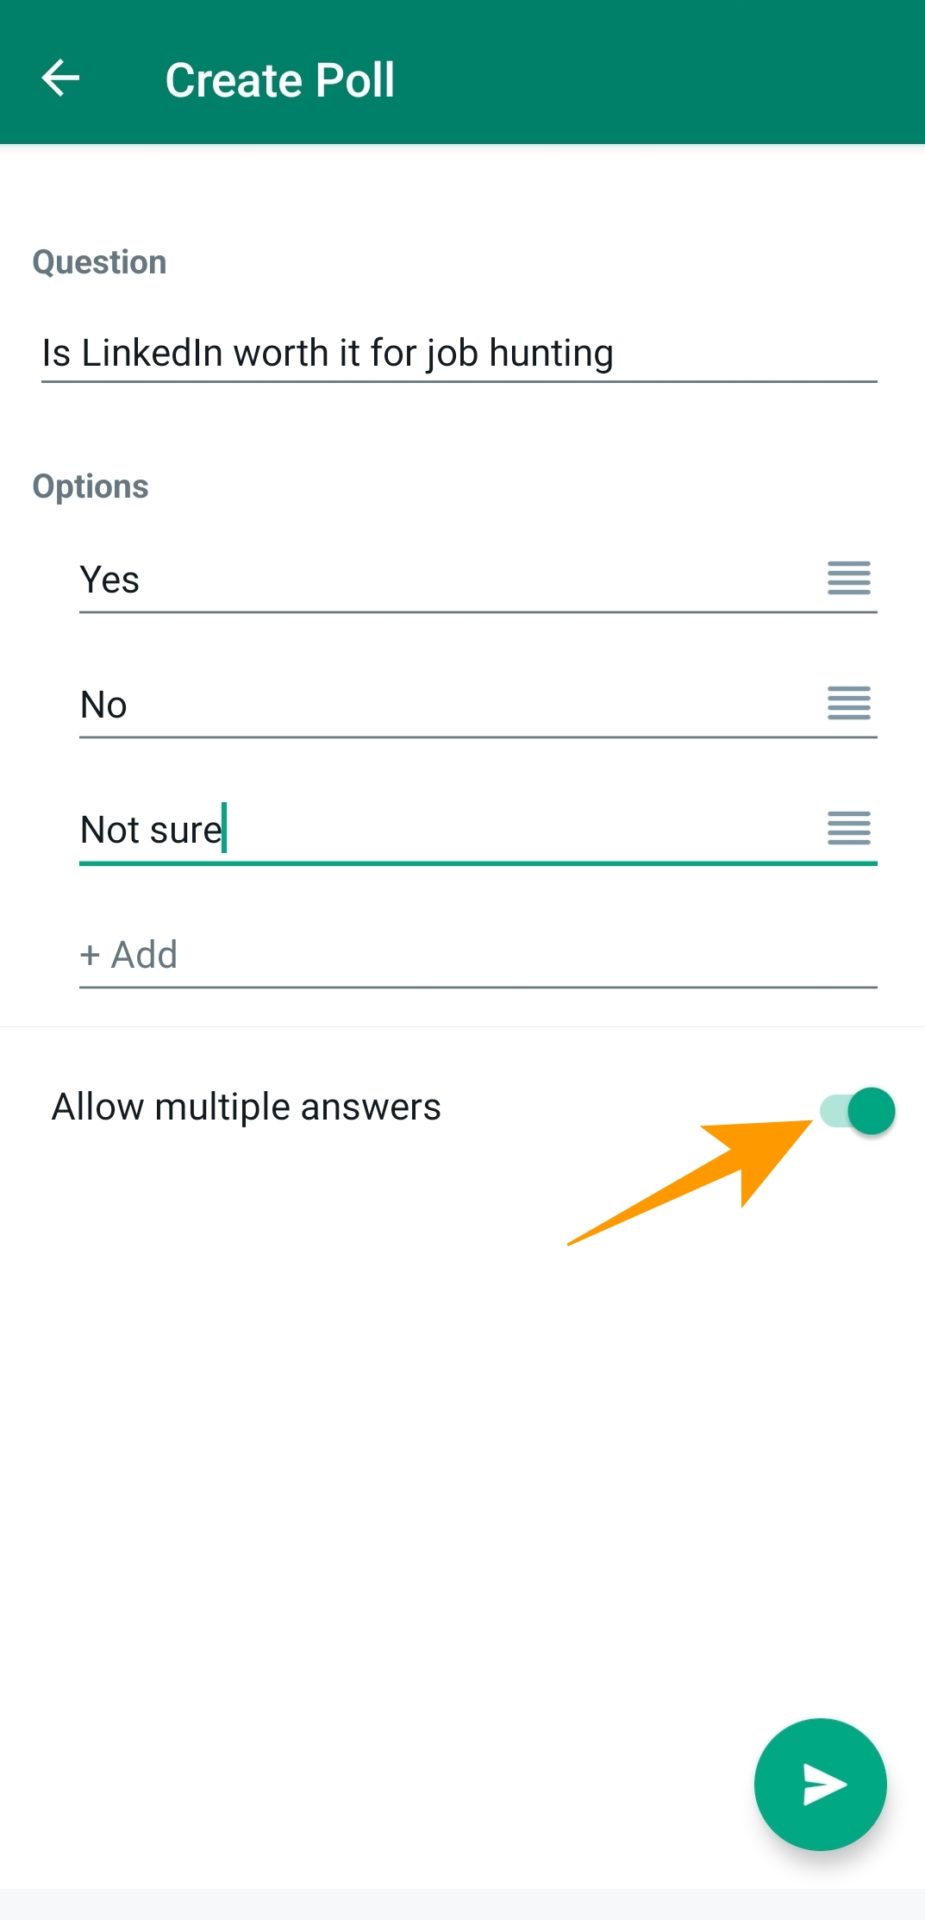 Allow multiple answers toggle